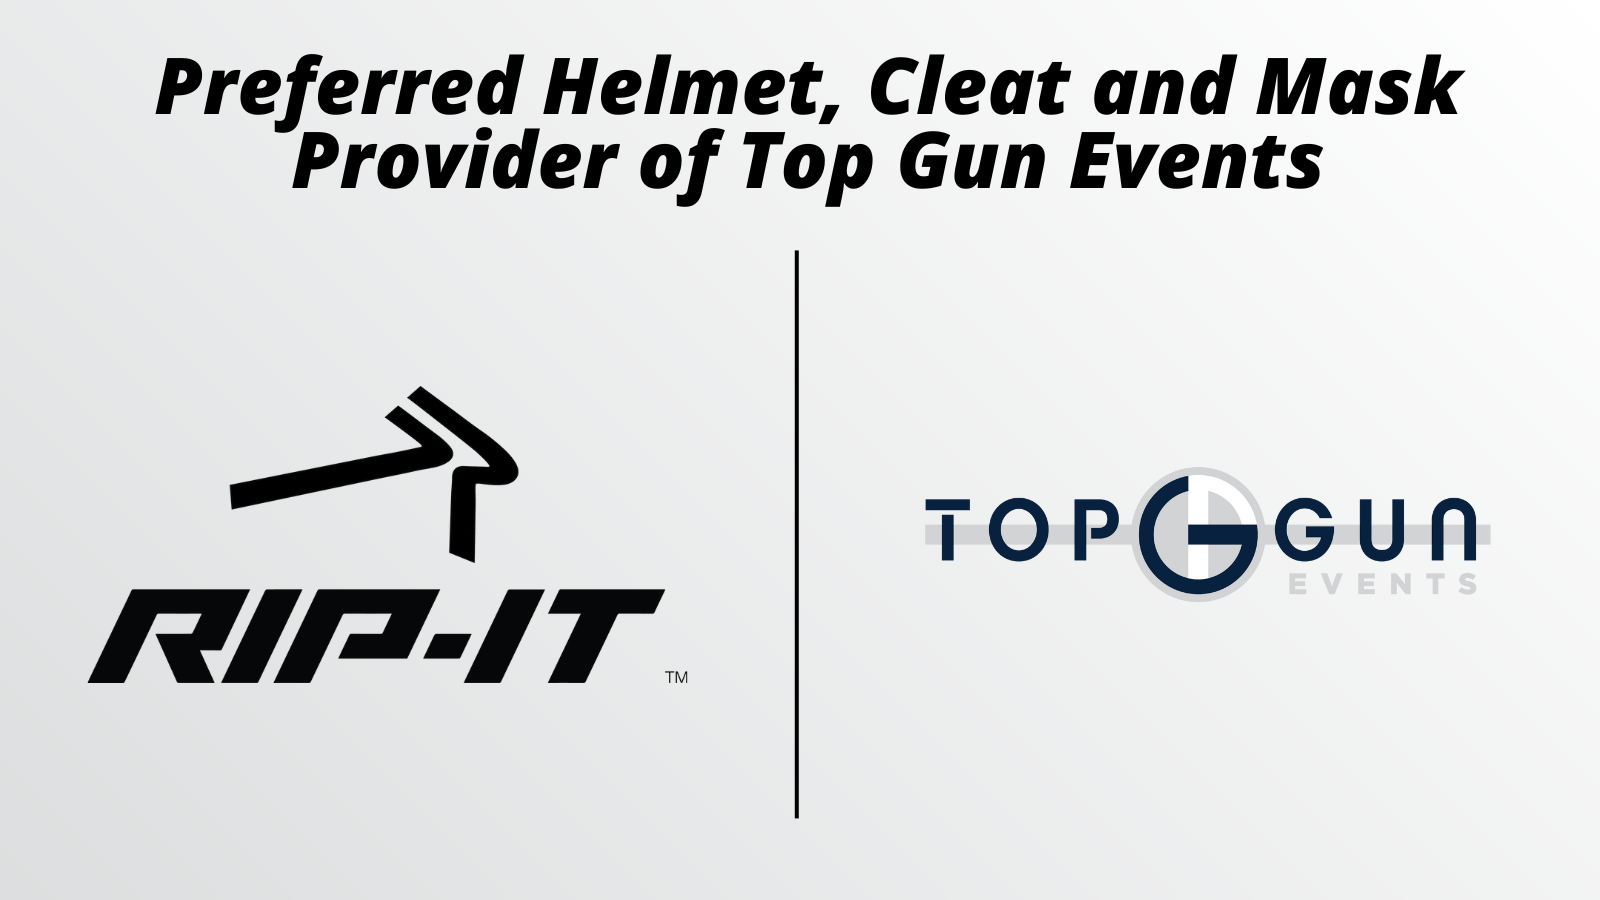 RIP-IT and Top Gun Events partner